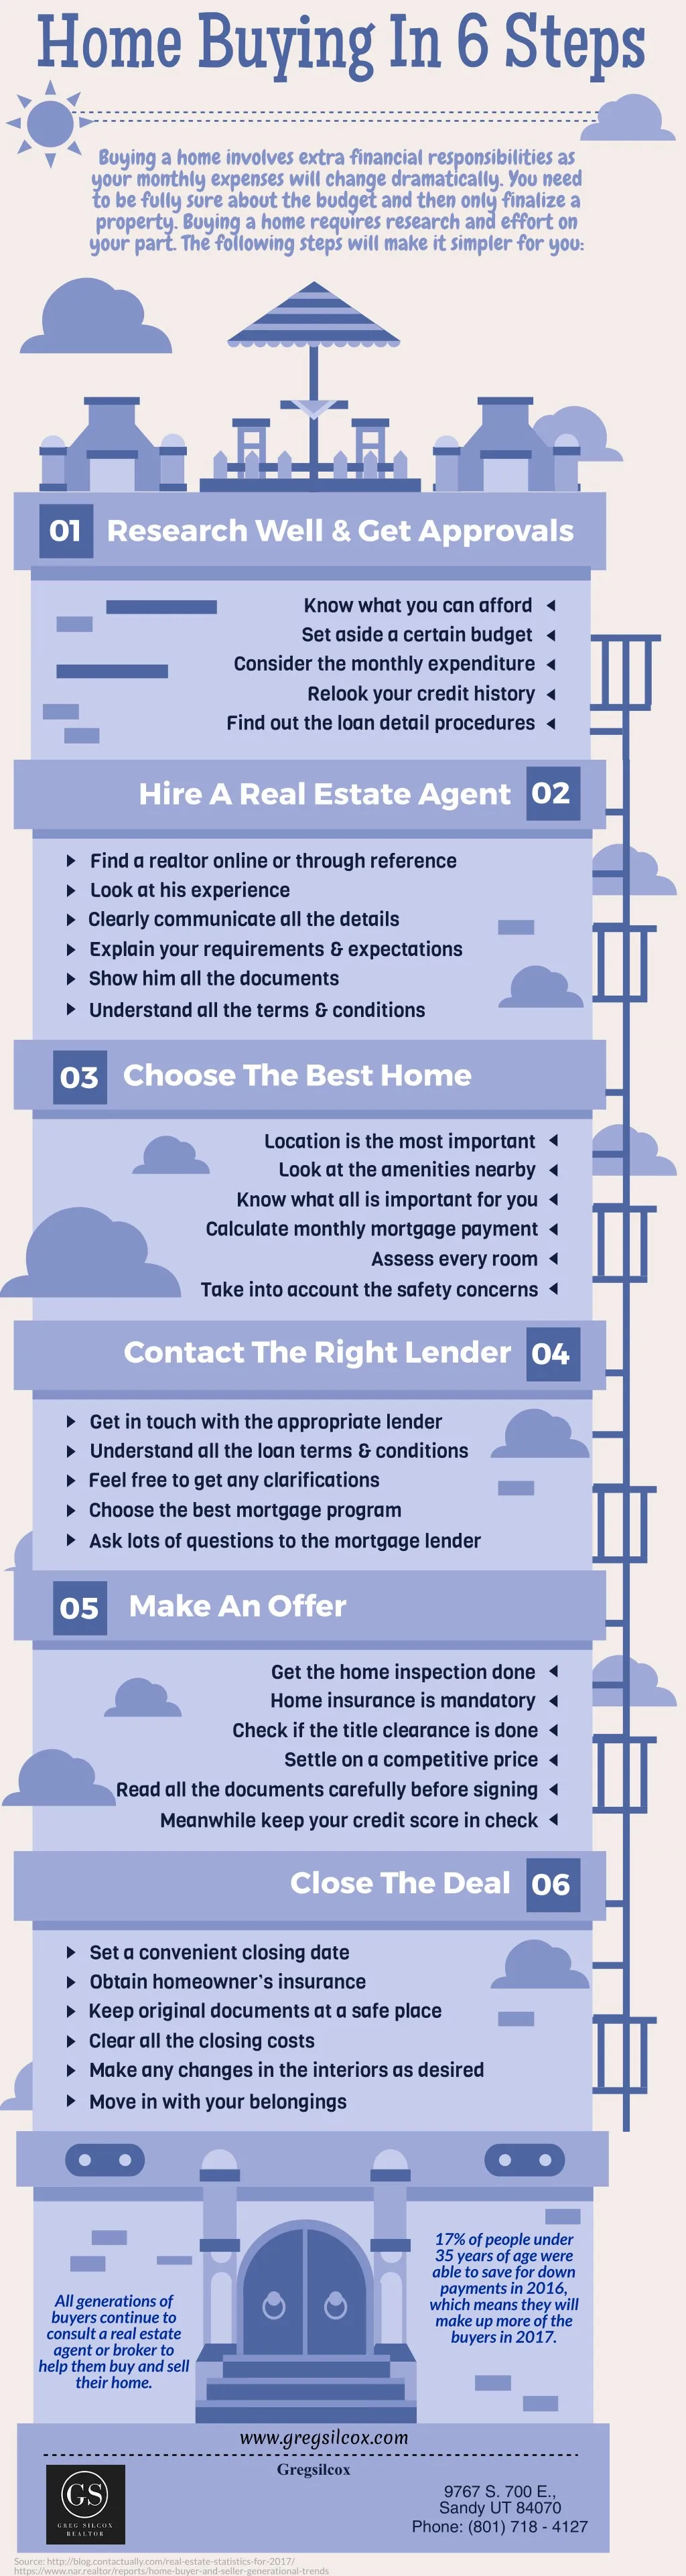 home buying in 6 steps